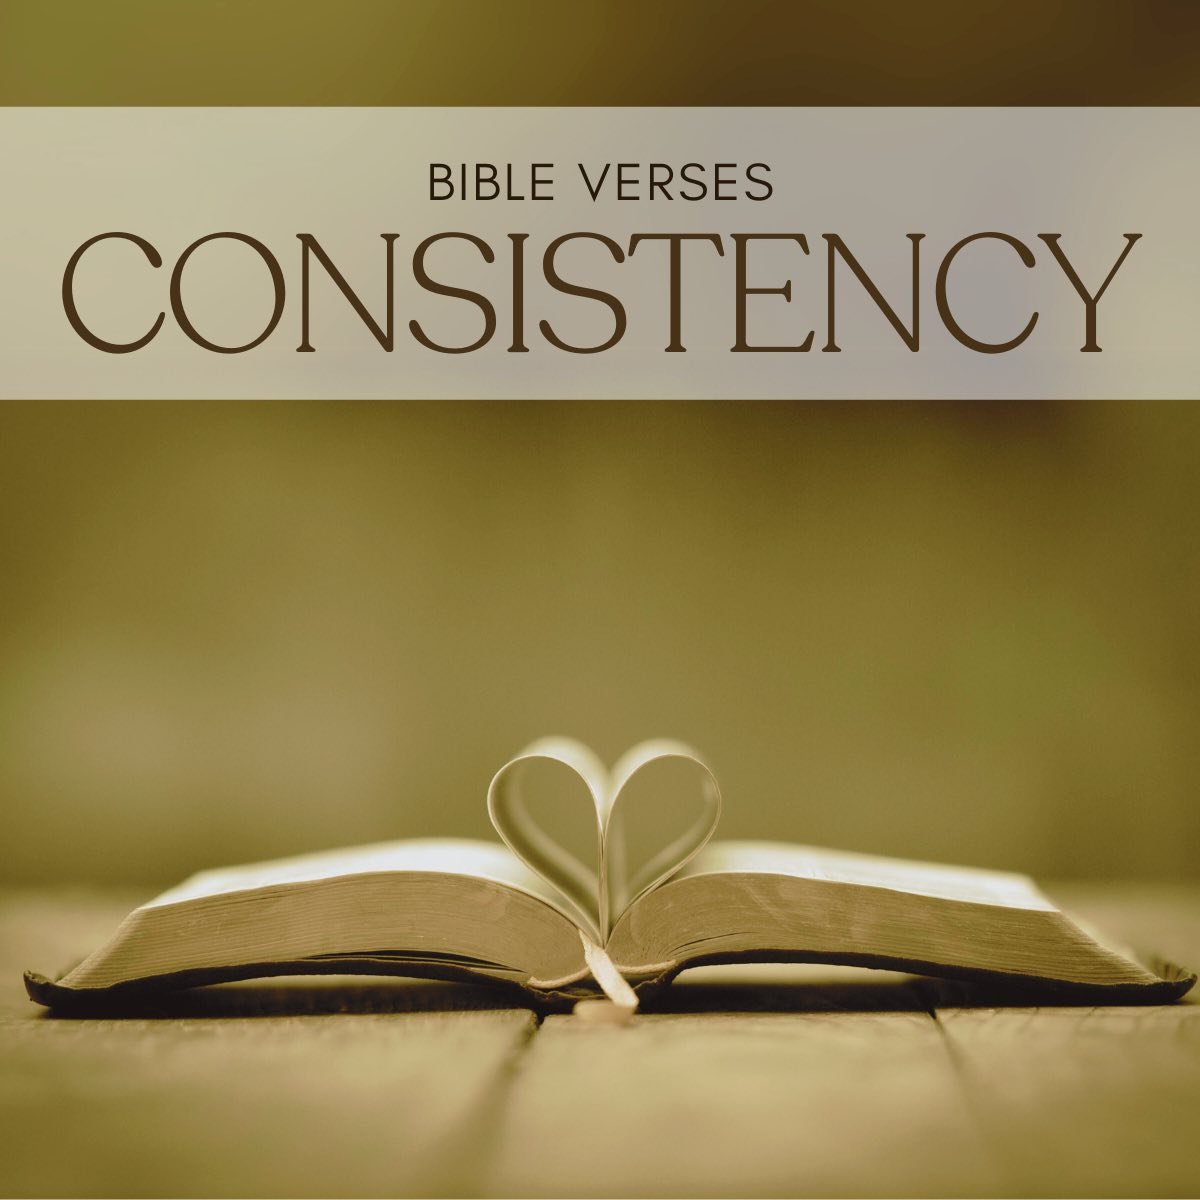 35 Bible Verses About Consistency